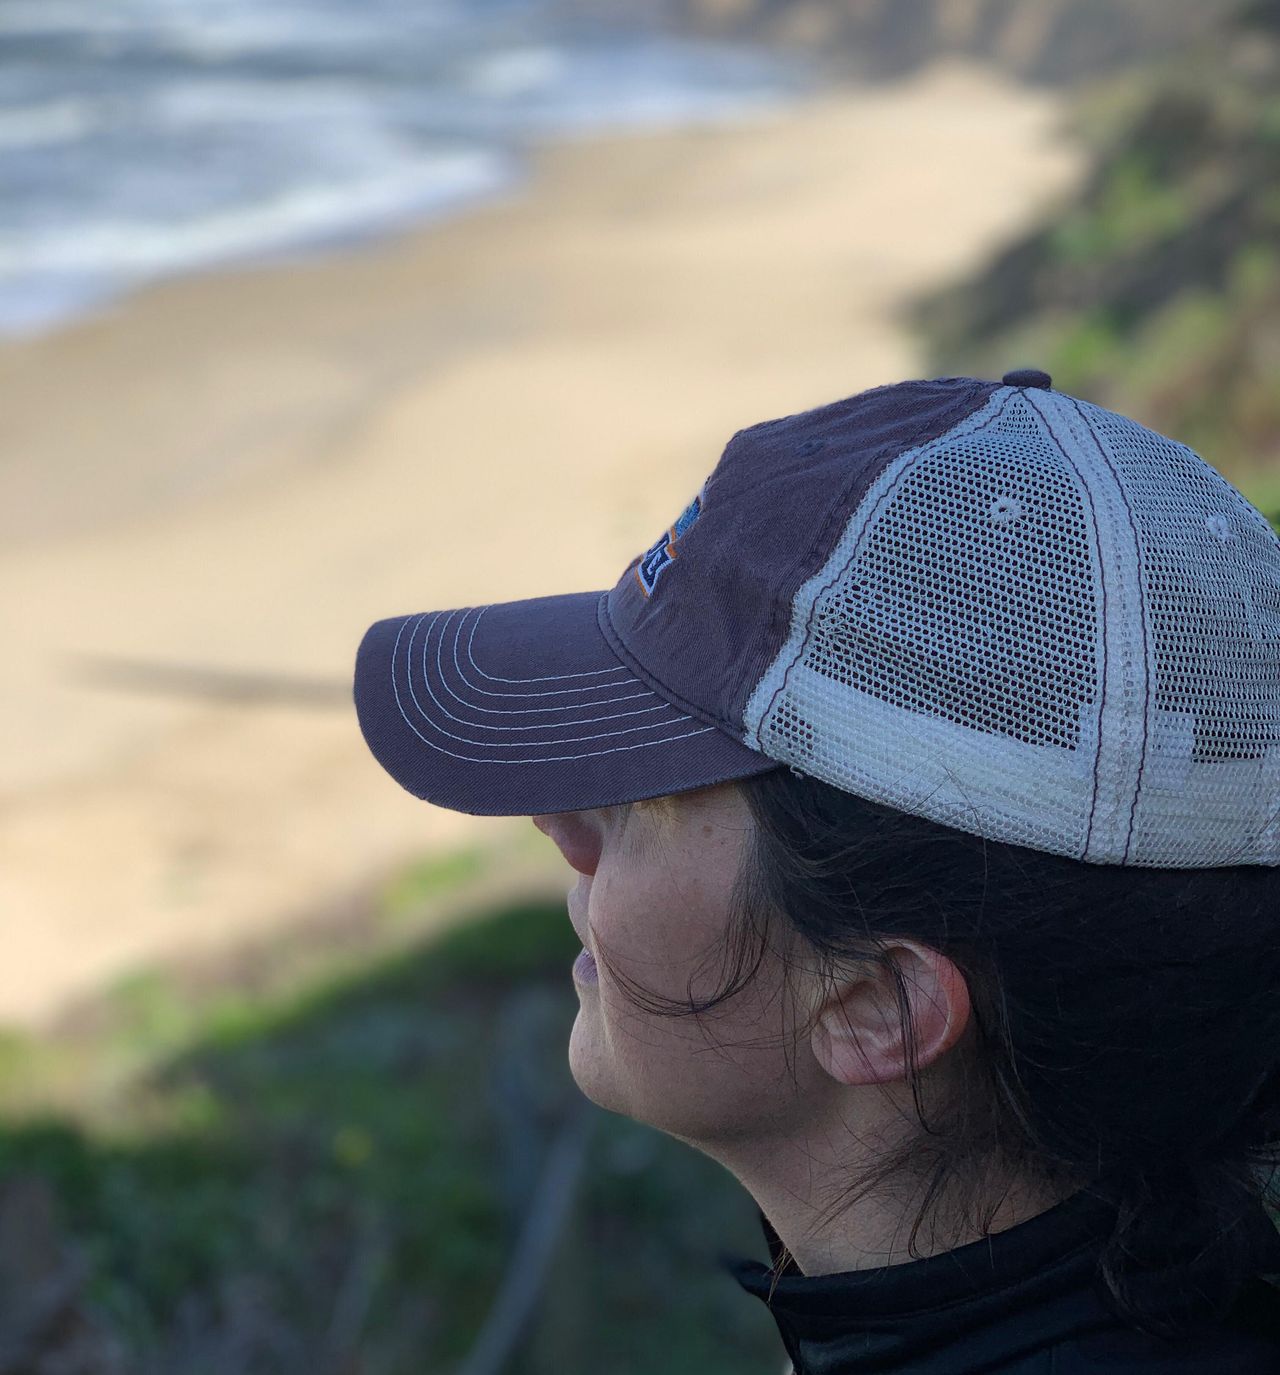 Reilly looking out over a beach near Half Moon Bay, California, on the day she and Peter threw sand into the ocean as their way of saying goodbye to Ceol (April 2019).